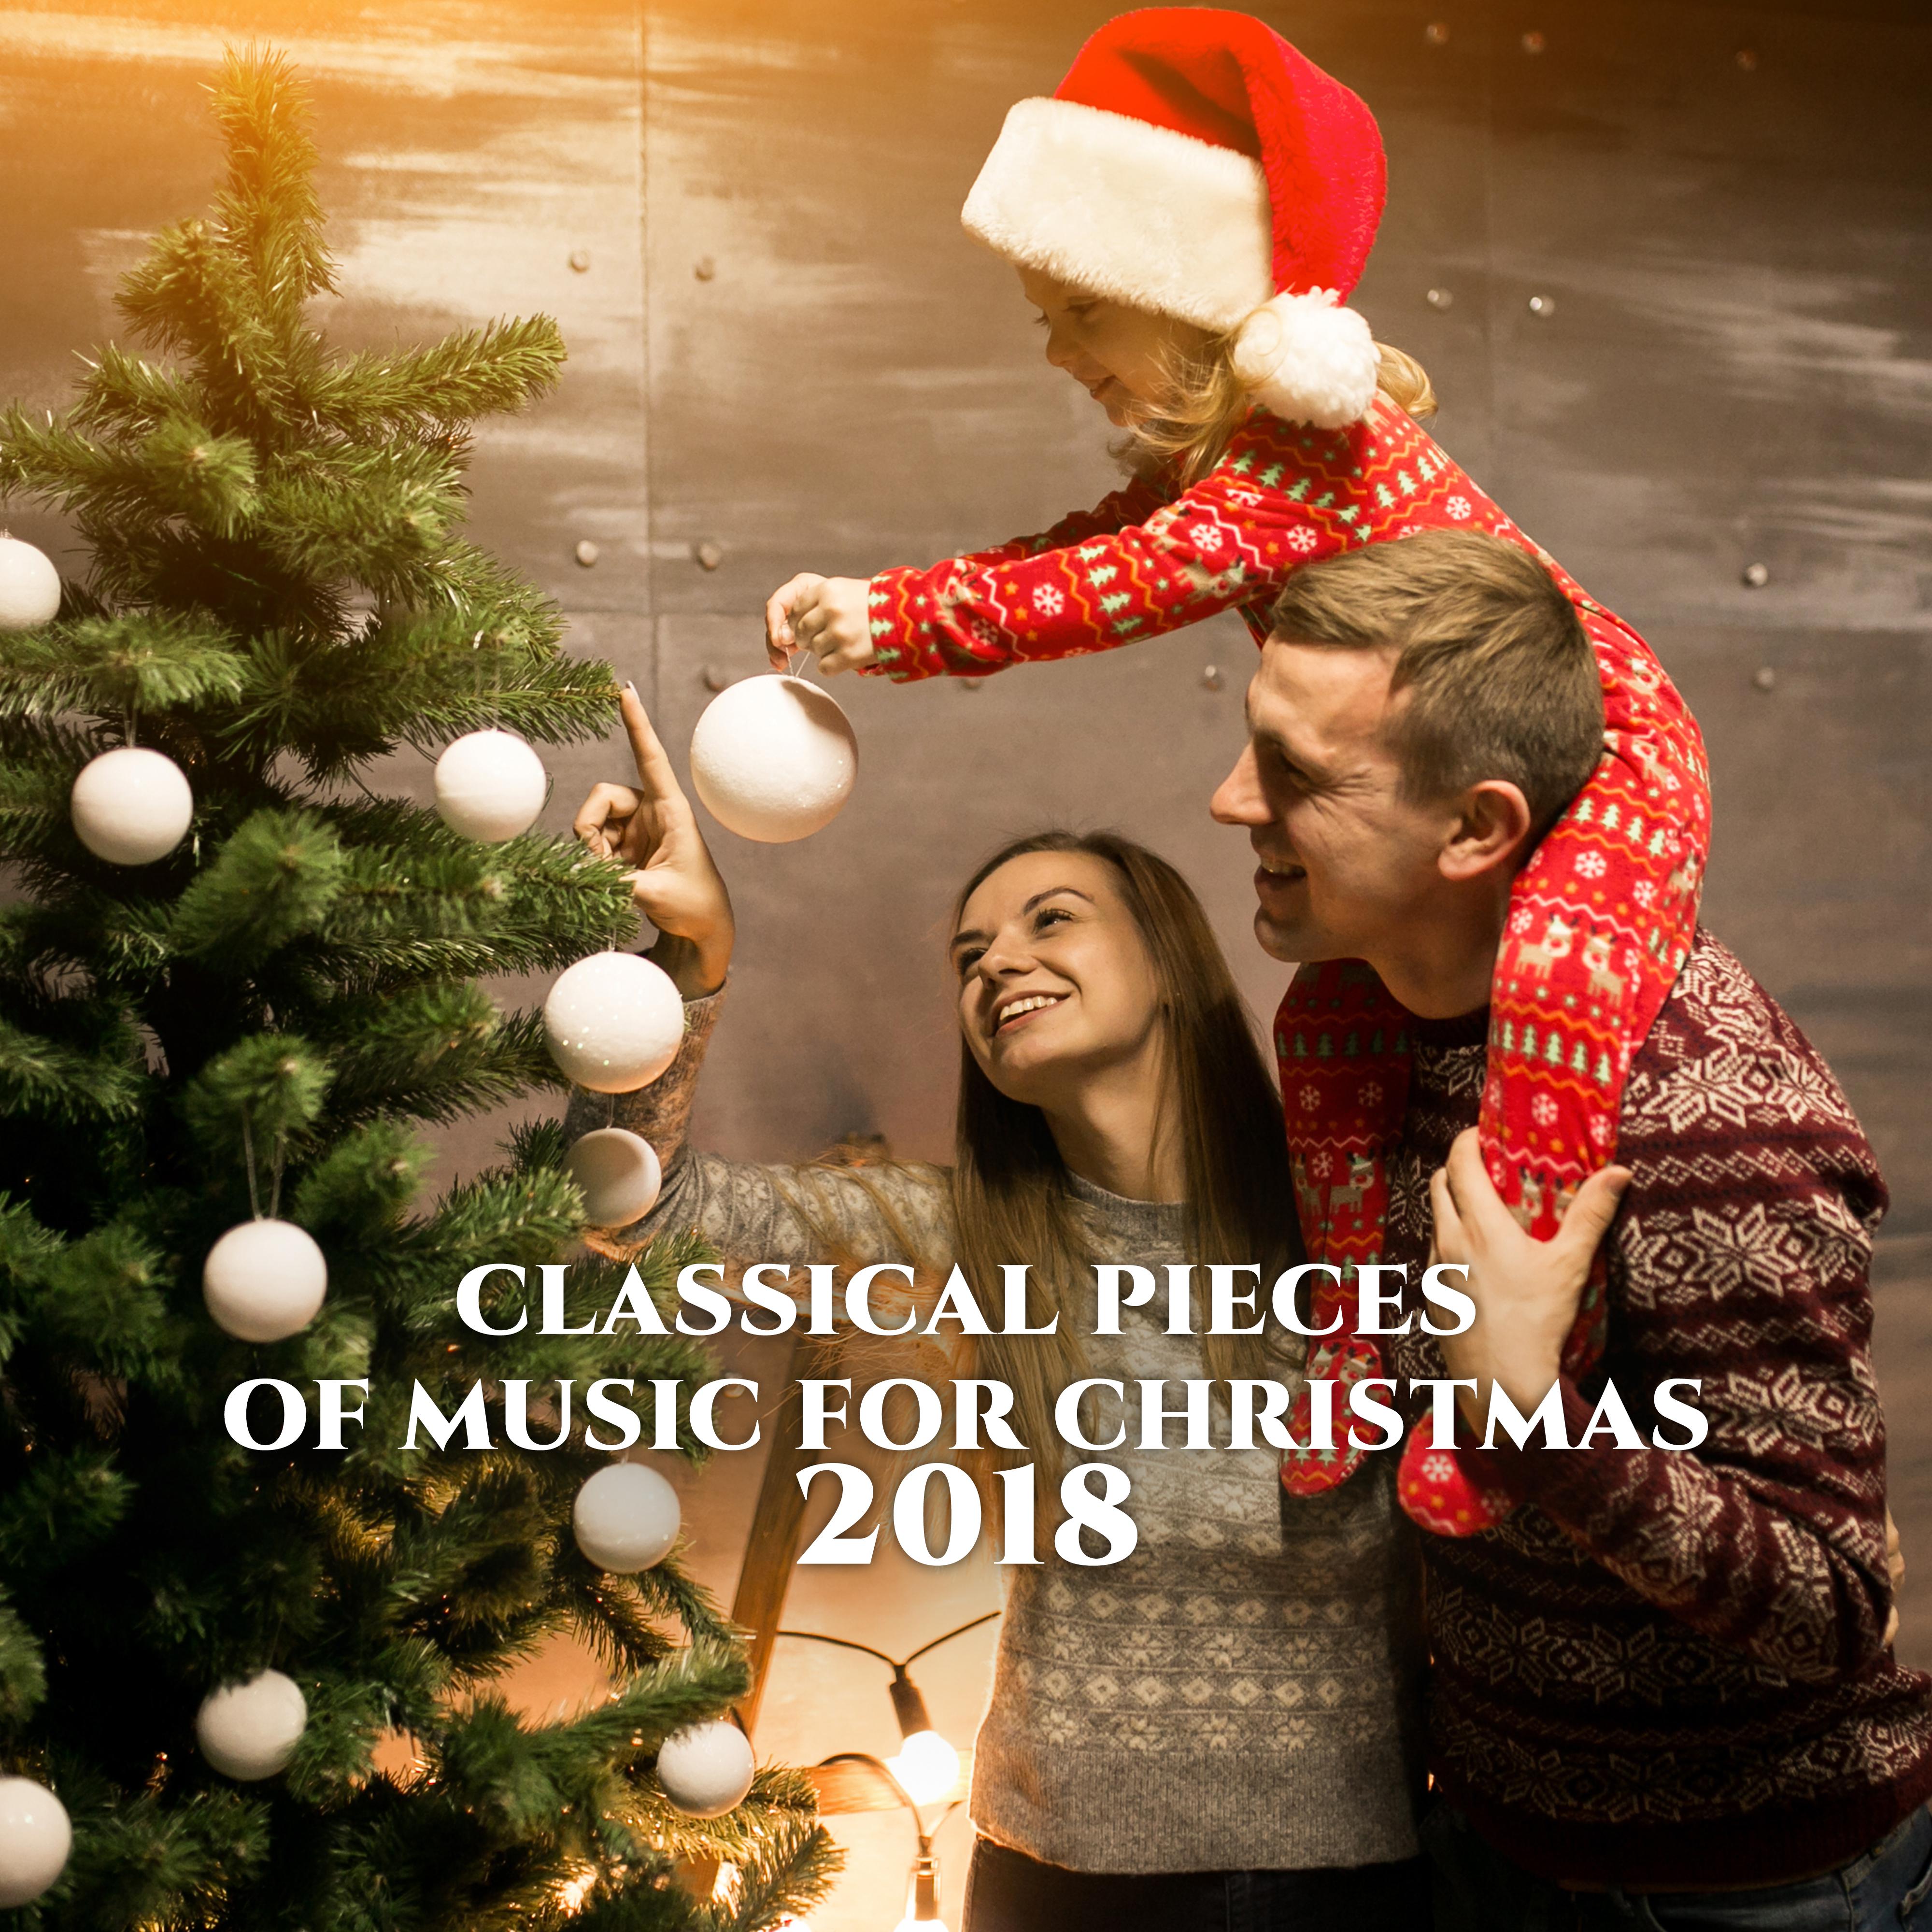 Classical Pieces of Music for Christmas 2018